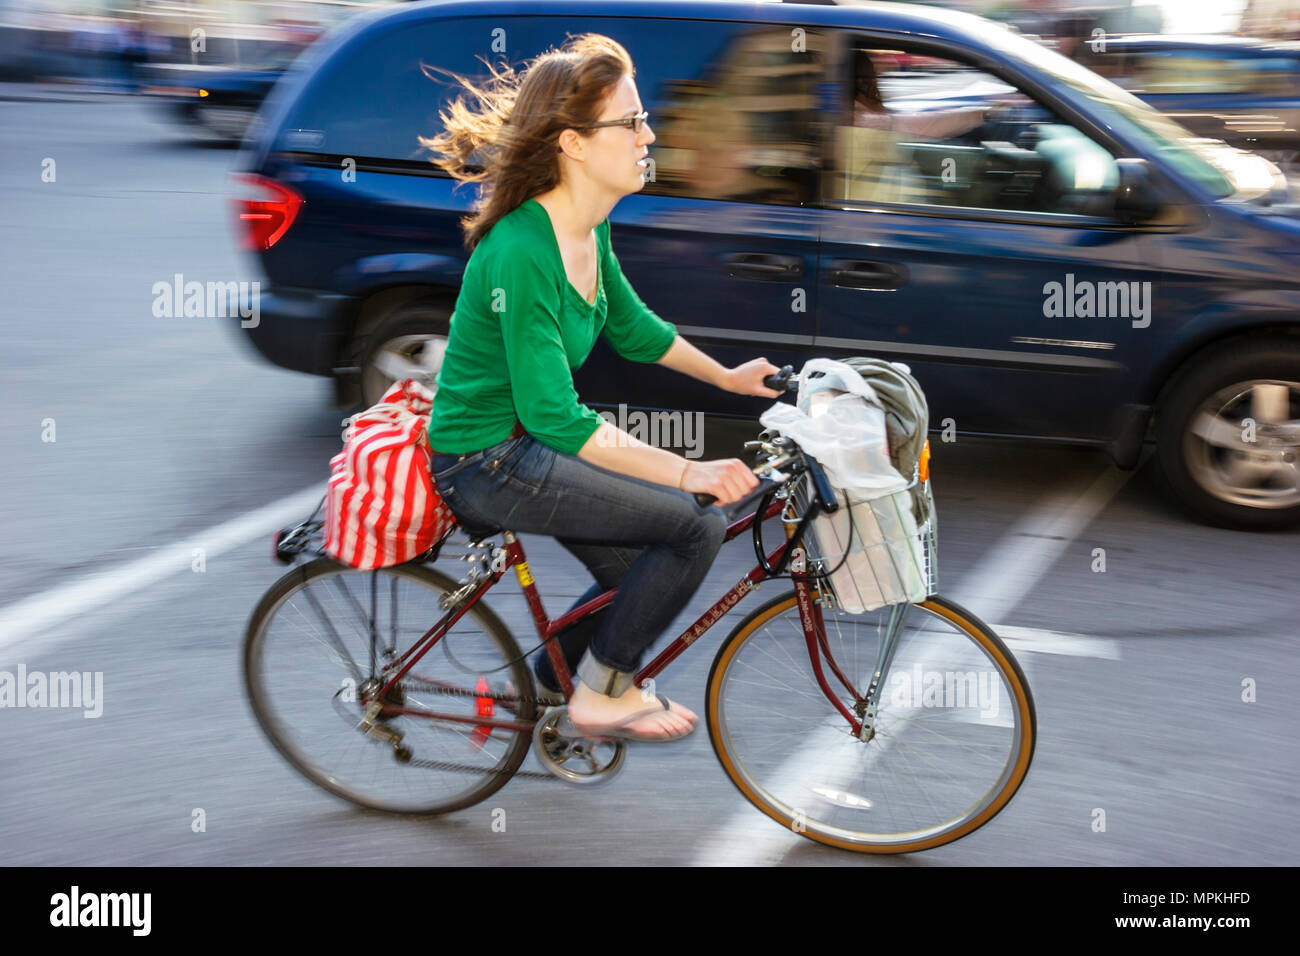 Montreal Canada,Quebec Province,Avenue du Parc,woman female pedals bicycle,bicycling,riding,biking,rider,bike,cars,traffic,Canada070705166 Stock Photo